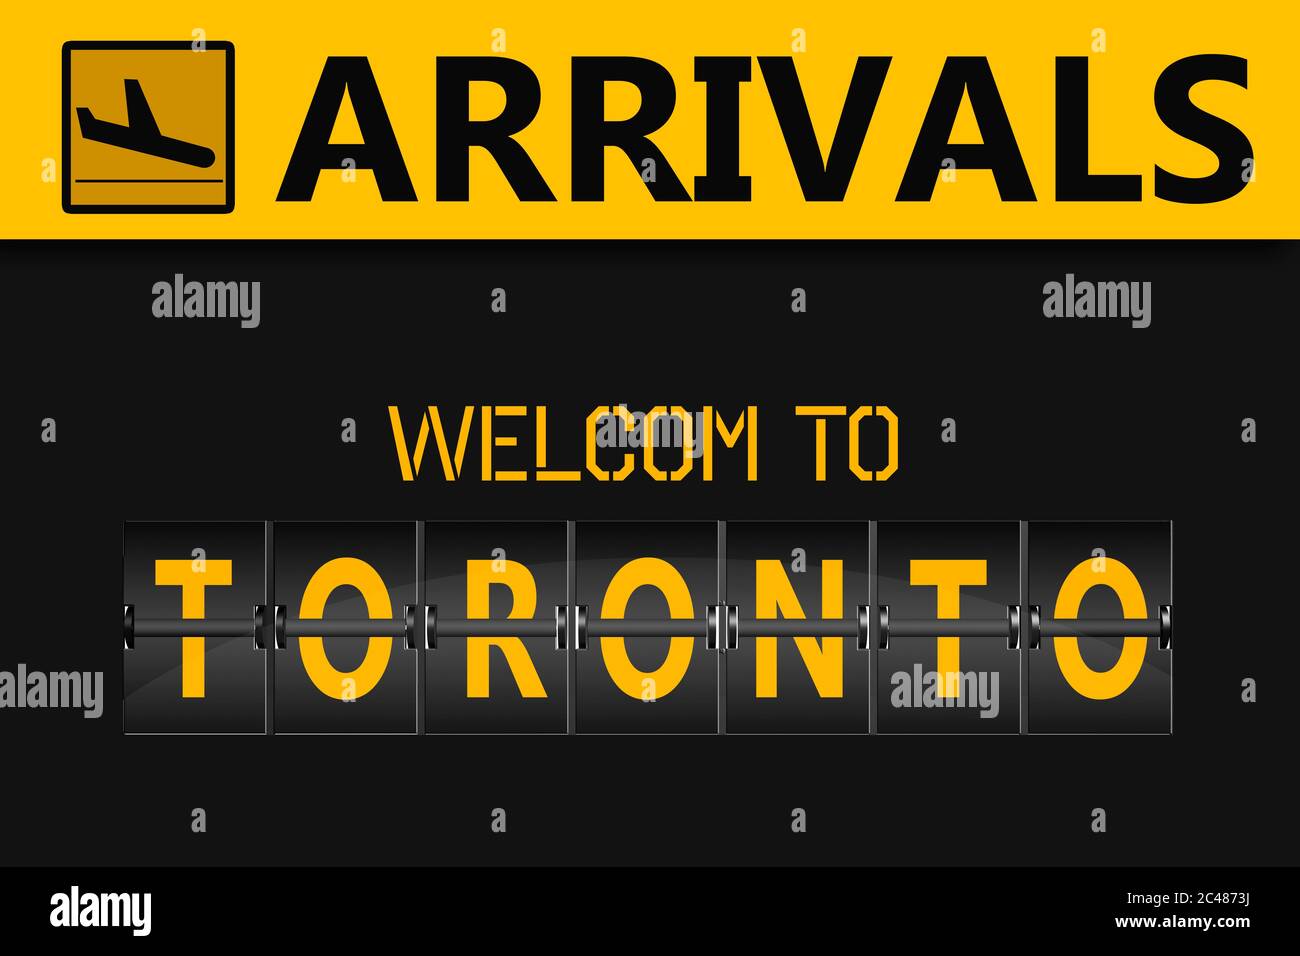 Toronto on airport arrivals flipping panel, 3d rendering Stock Photo